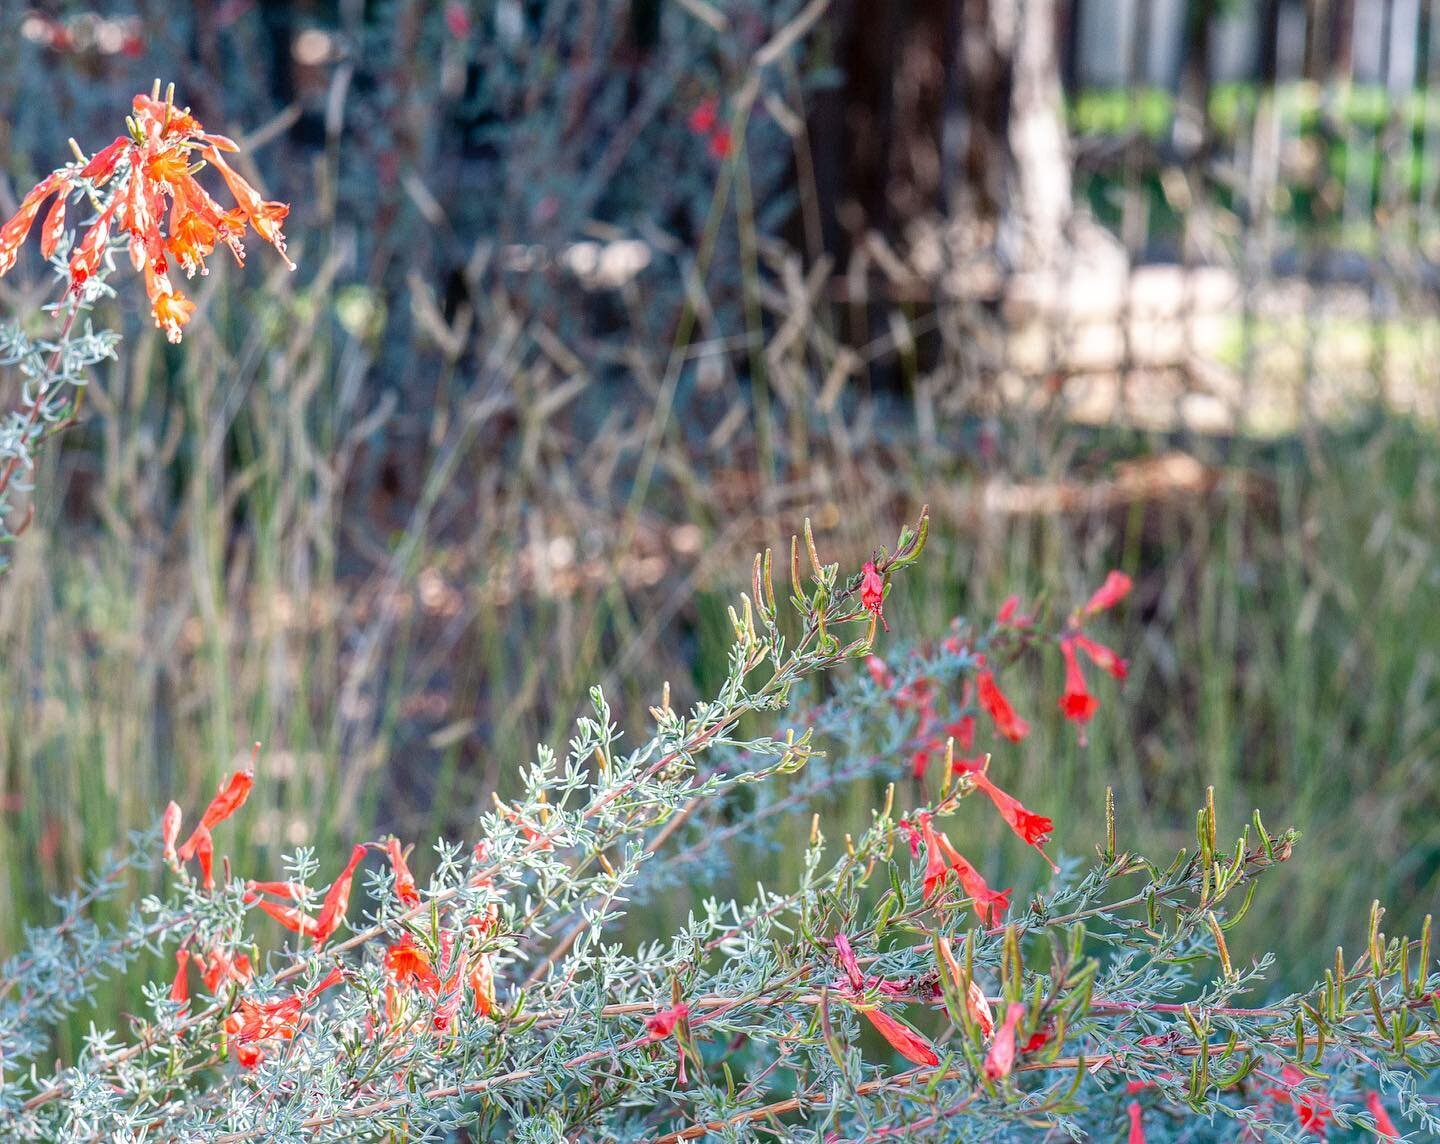 California fuchsias bring a pop of fall color to California gardens. Plant a couple different varieties for a mix of red to orange blooms and green to silvery foliage. 
 

#landscapearchitecture #landscapedesignbuild #nativeplants #californianativepl